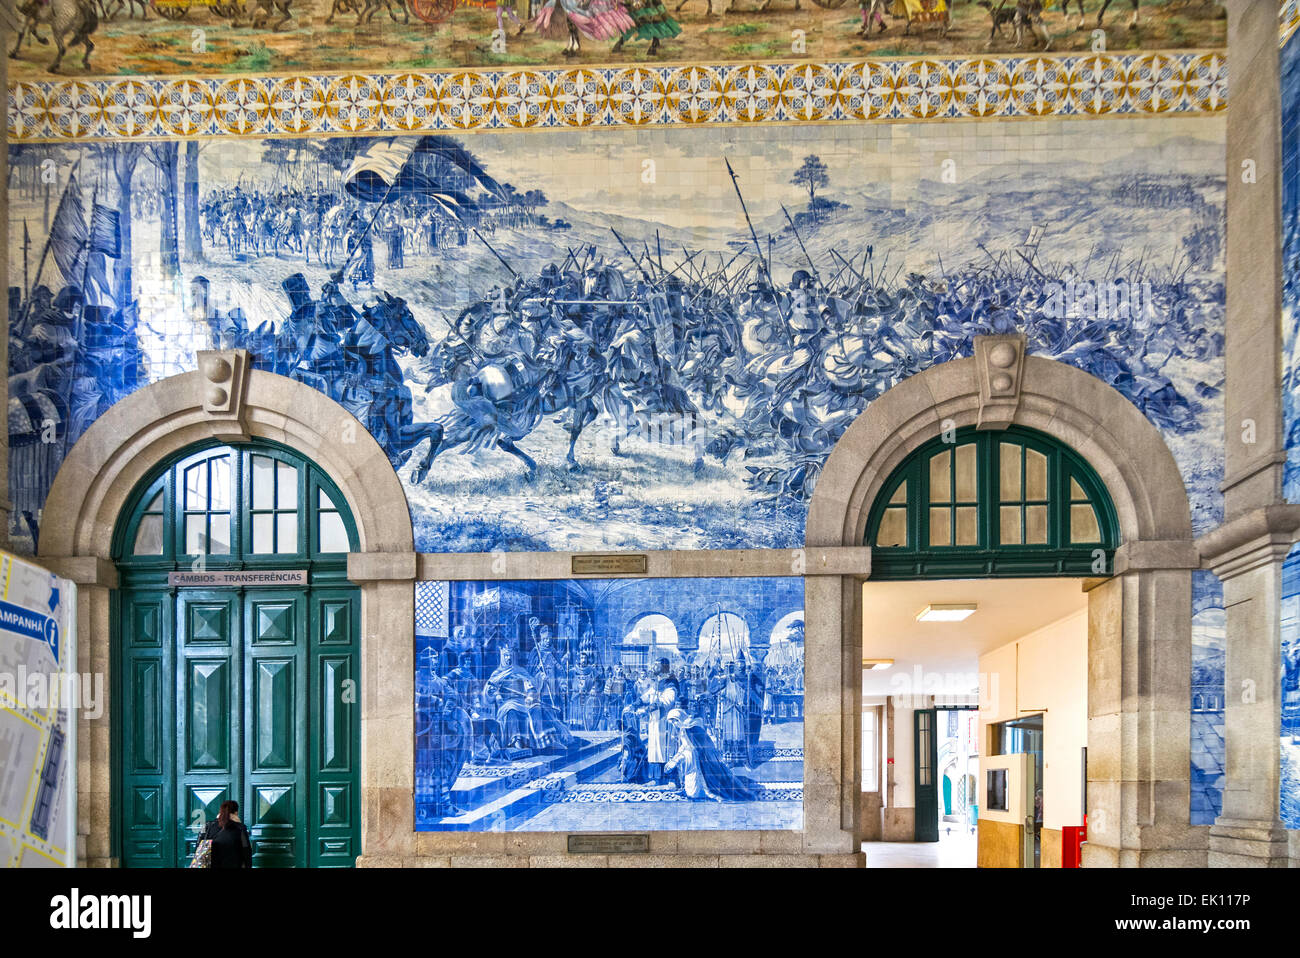 PORTUGAL PORTO THE TRAIN STATION SAO BENTO WITH BLUE AND COLOURED TILES  WITH HISTORICAL SCENES LOOKING TOWARDS THE SIDE WALL Stock Photo - Alamy